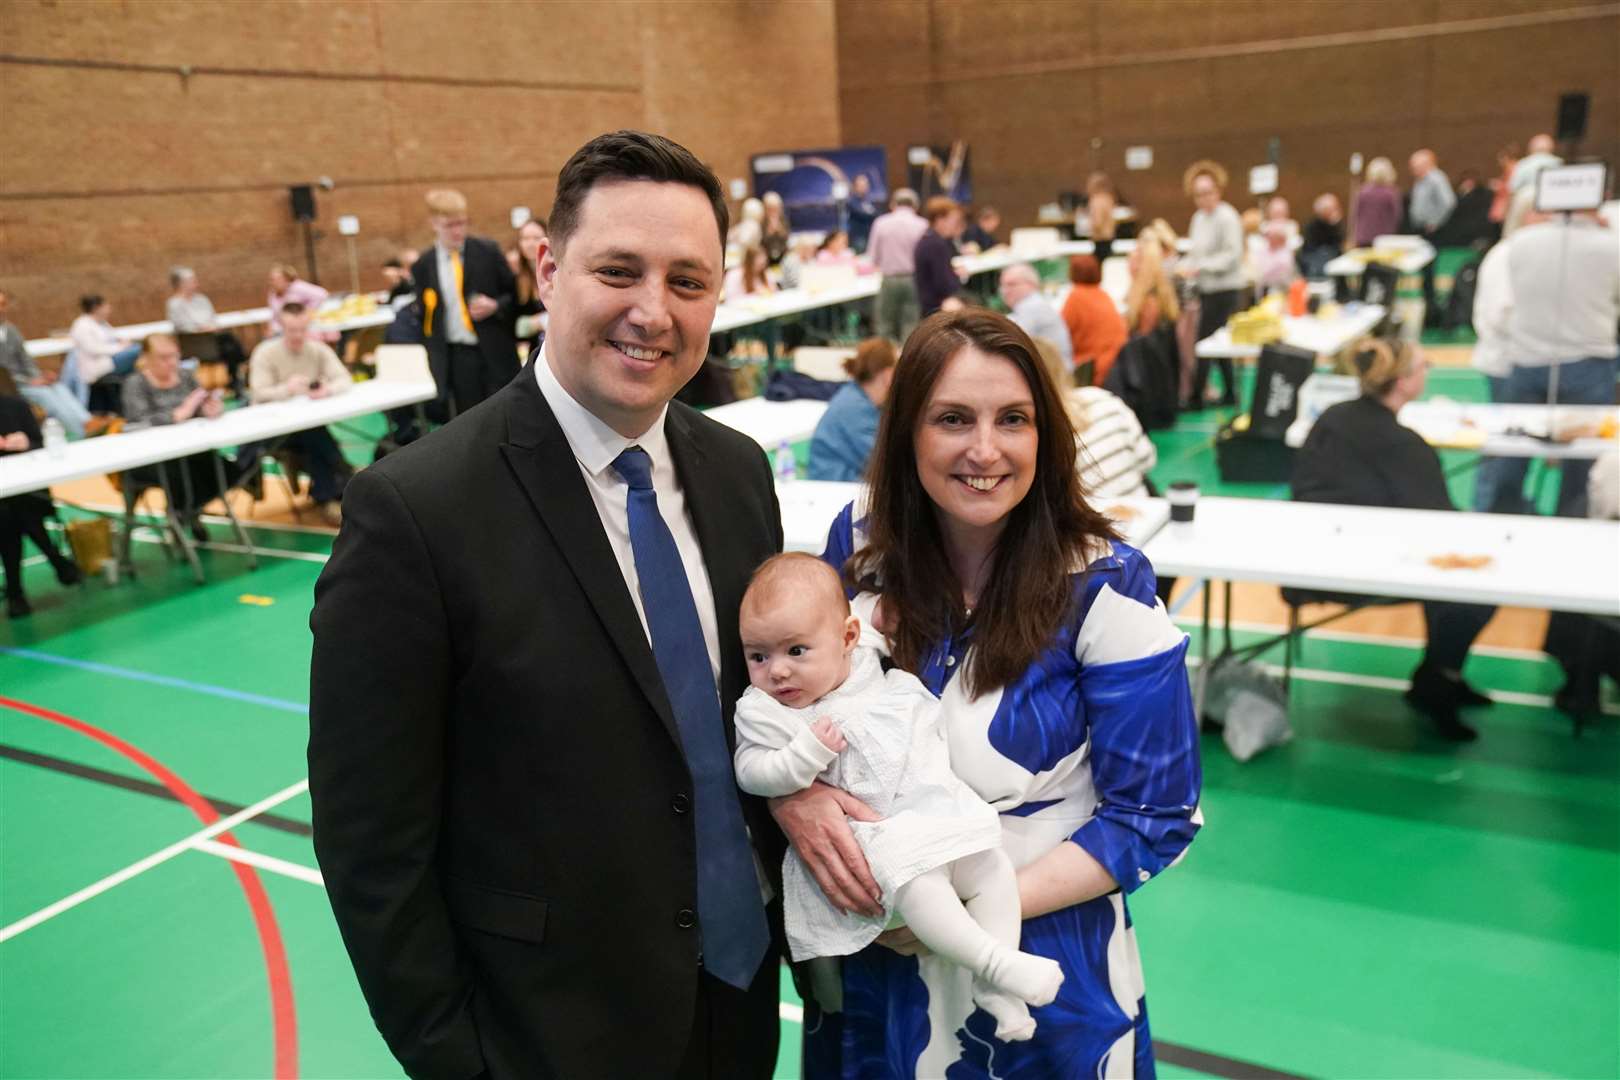 Conservative Party candidate Lord Ben Houchen with his wife Rachel Houchen and baby Hannah during a count of votes for the Tees Valley mayoral election in the Thornaby Pavilion, Stockton-on-Tees (Owen Humphreys/PA)